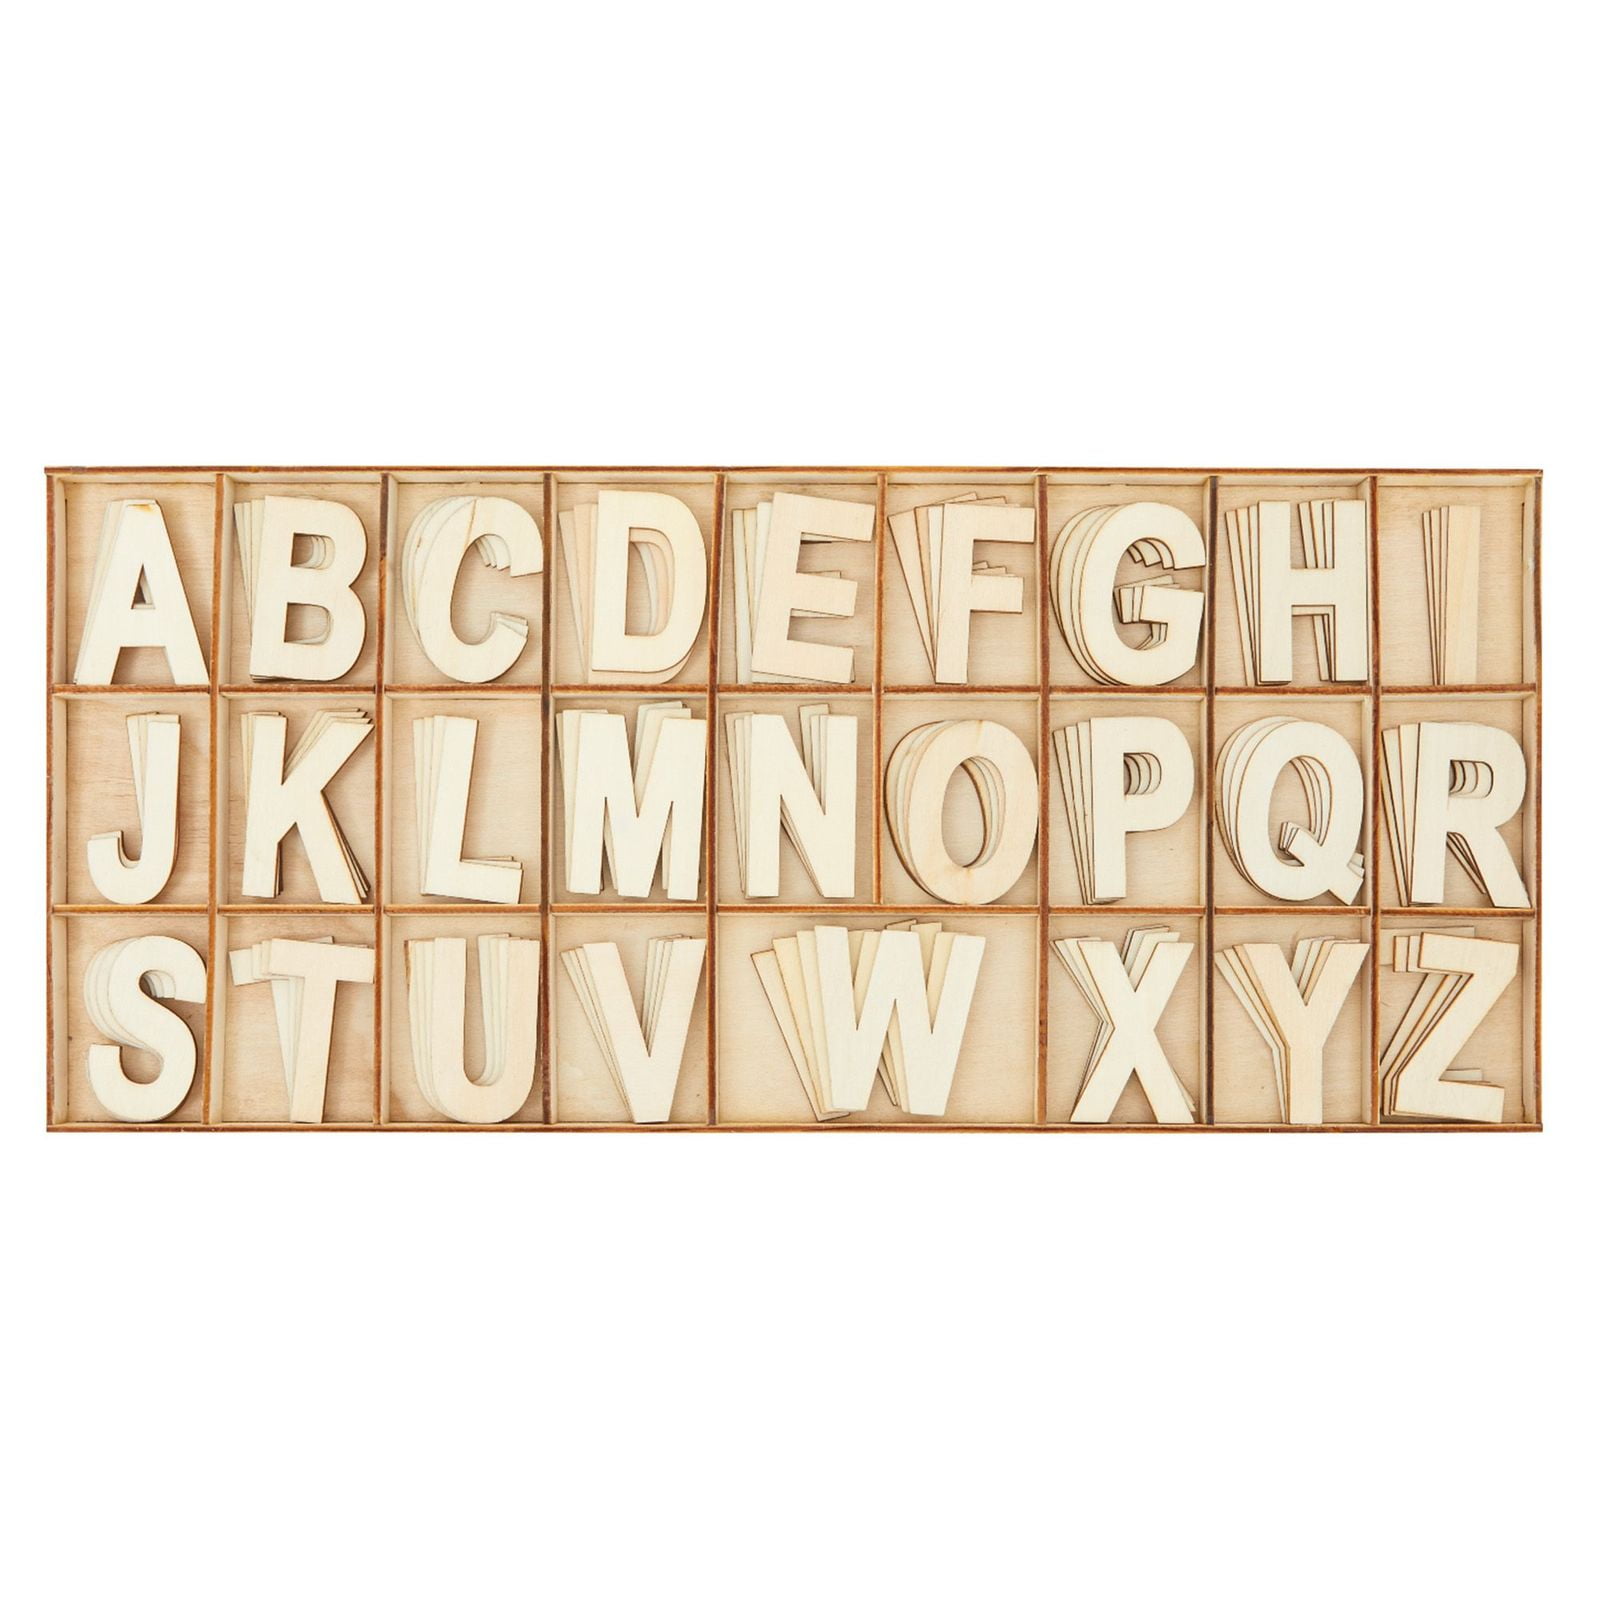 Craft Alphabet Wooden Letters School Educational Set NEW CHOOSE YOUR LETTERS 